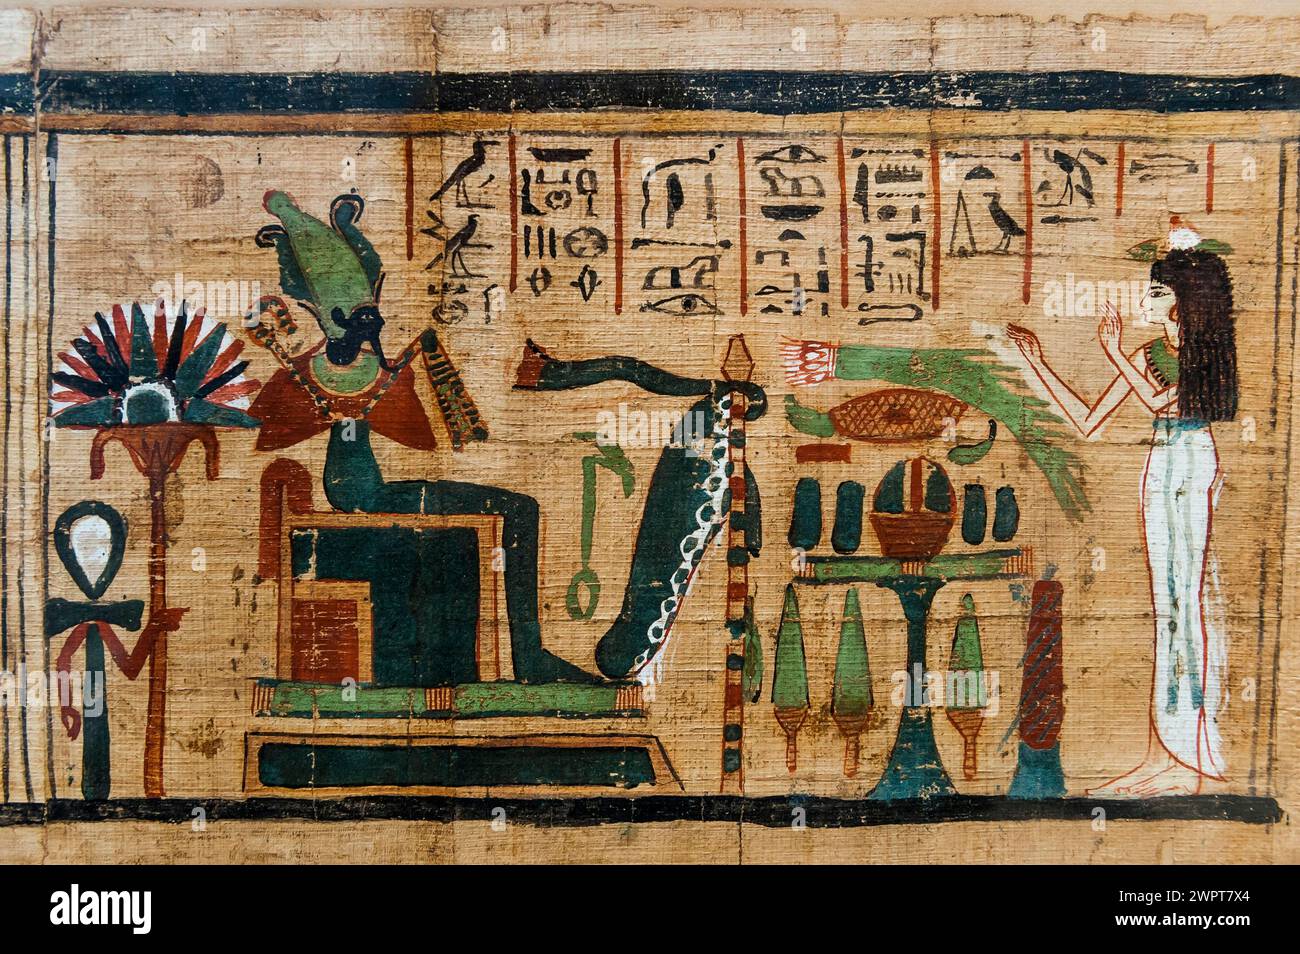 Hieroglyphs on papyrus, message, drawing, Egyptian, kingdom, antiquity, world history, history, tradition, culture, cultural history, stone, sign Stock Photo